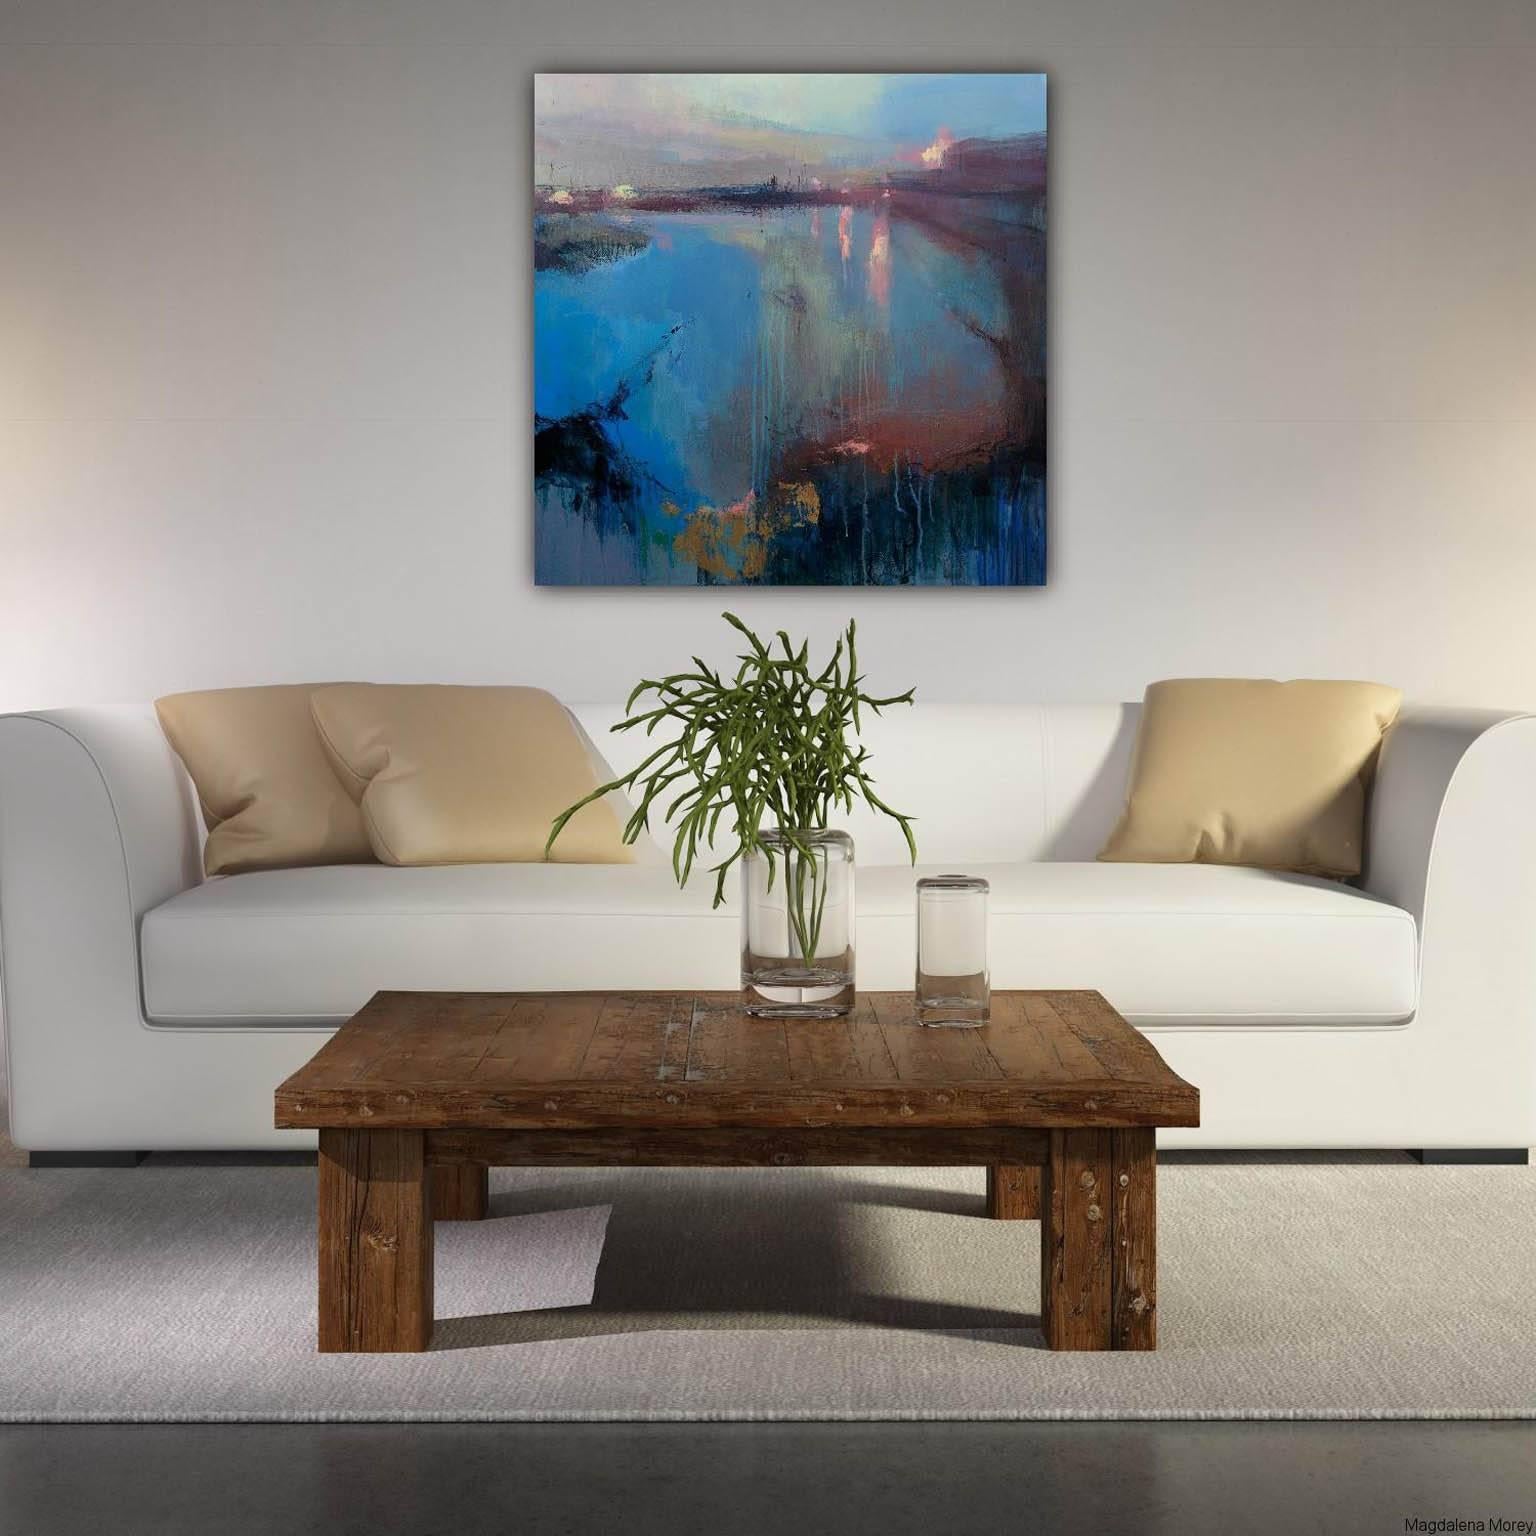 Evening Promenade 4, Original Abstract Art, Contemporary Landscape Painting - Blue Abstract Painting by Magdalena Morey